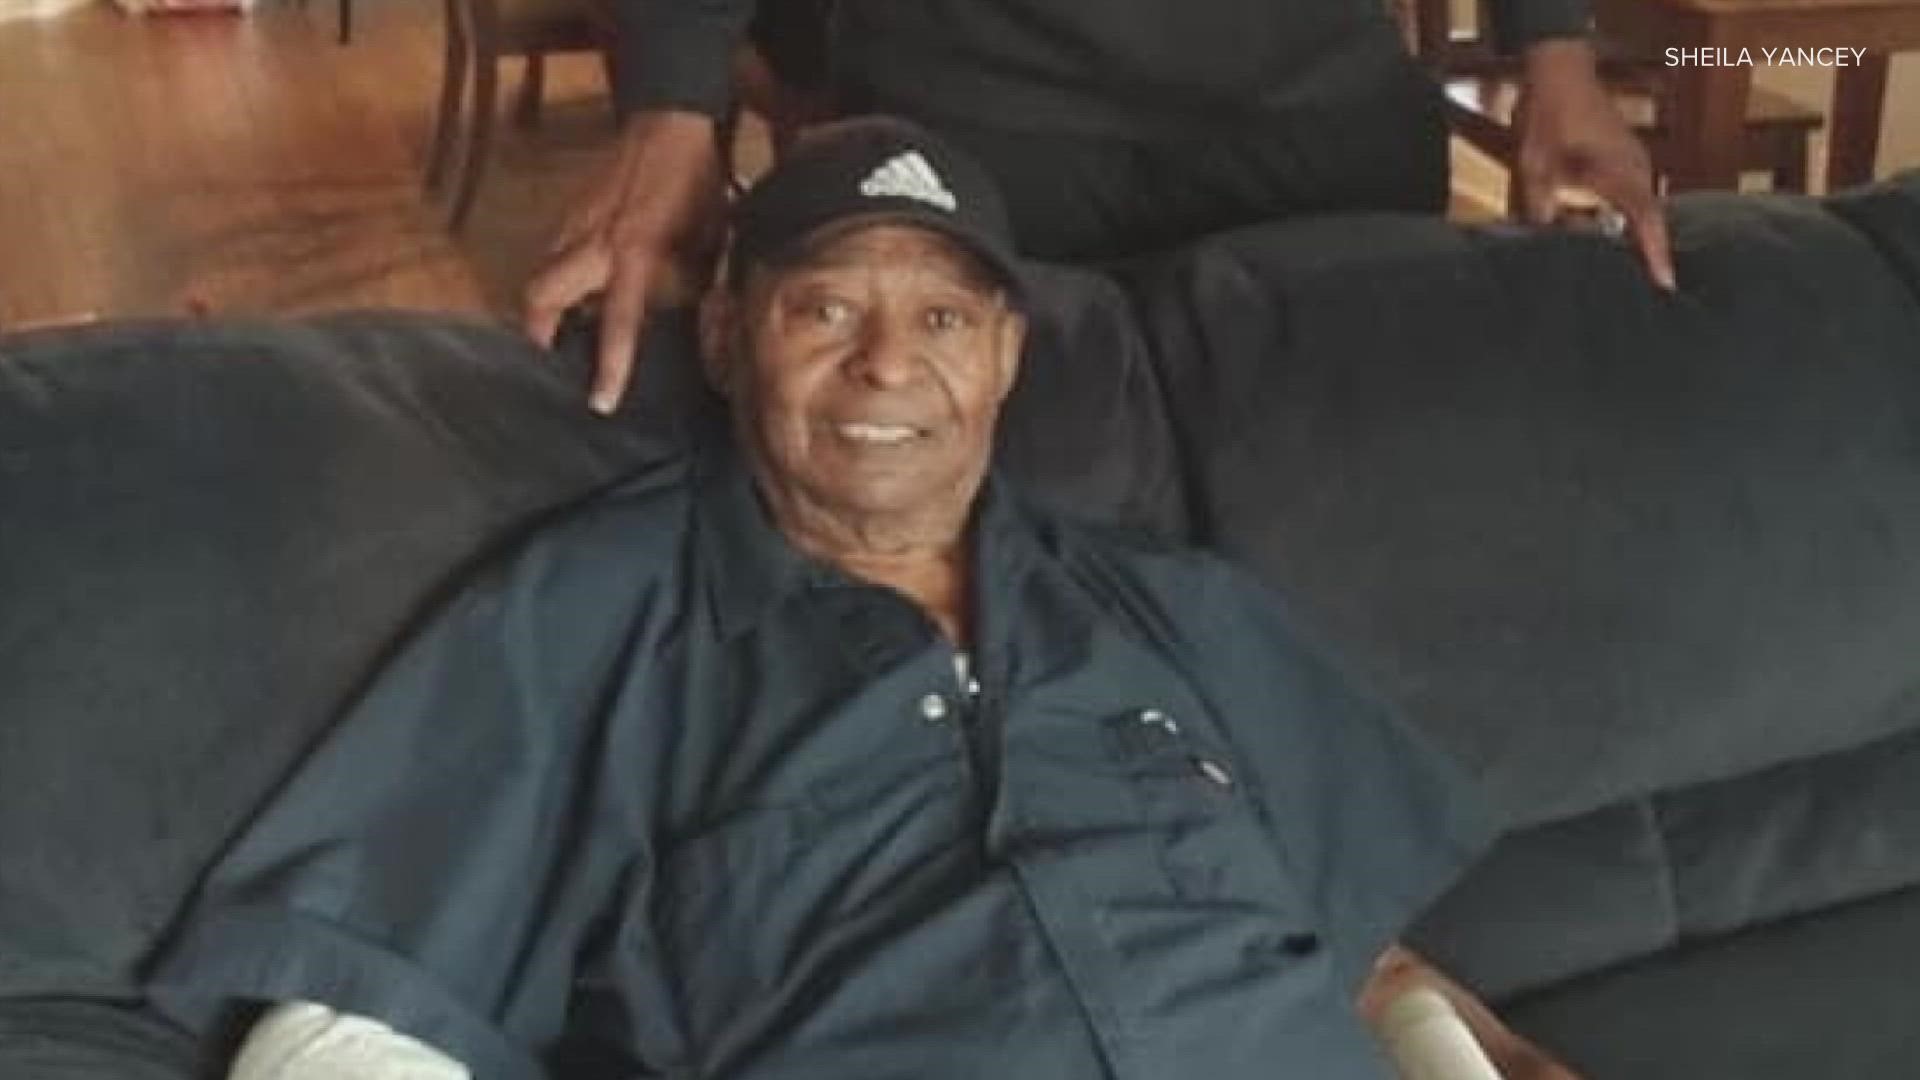 Politicians, community members, and family are remembering the life of Clarence Yancey.